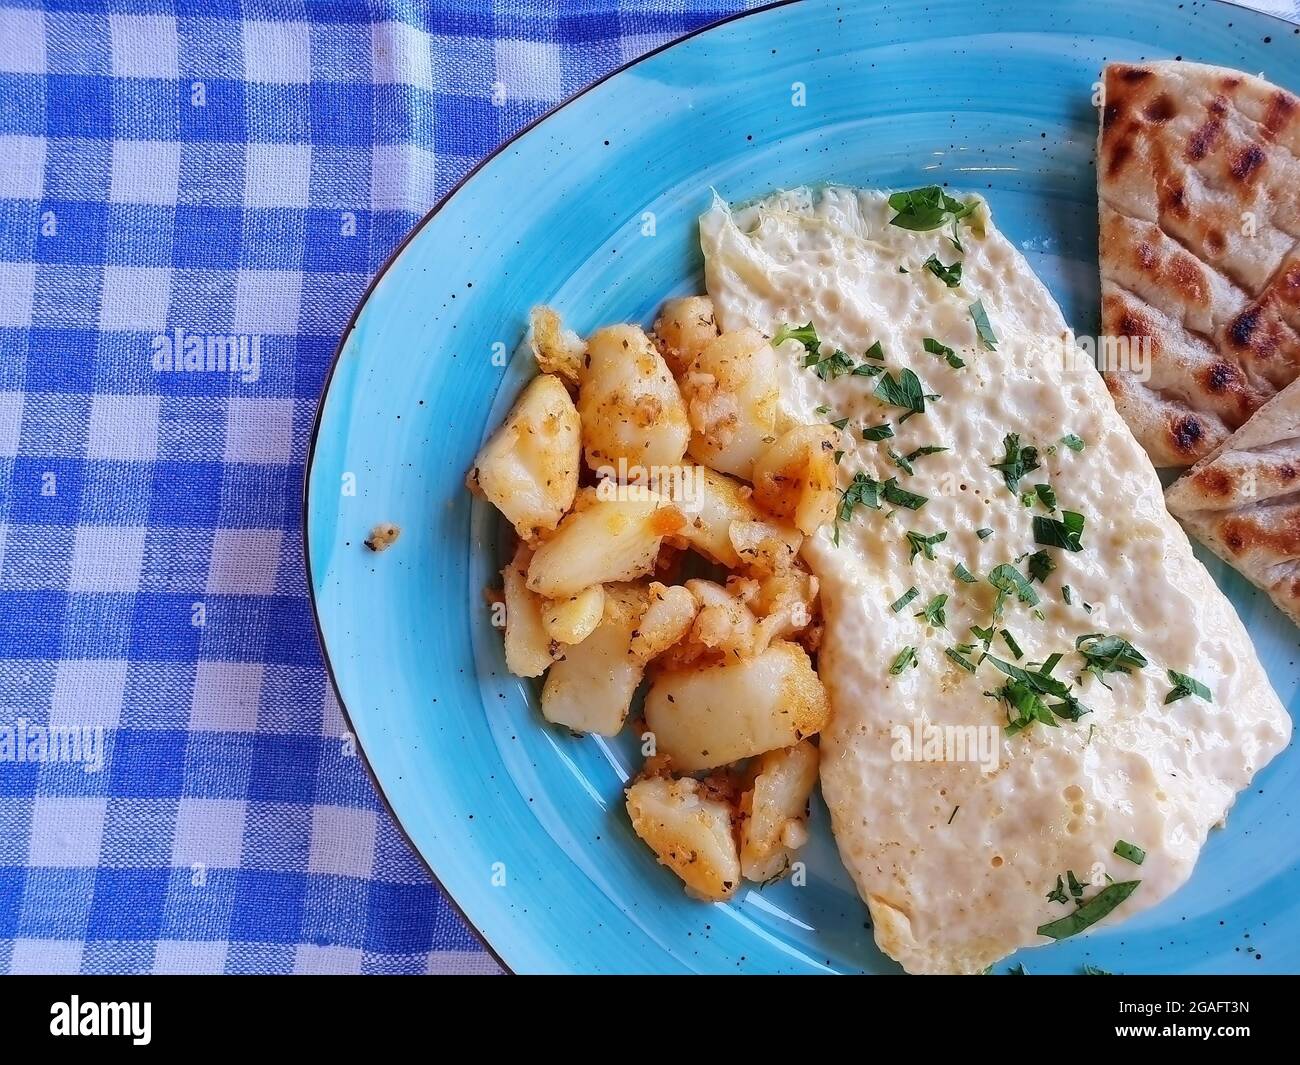 Delicious breakfast of scrambled eggs, potatoes and bread. The food is served on a blue plate. Stock Photo